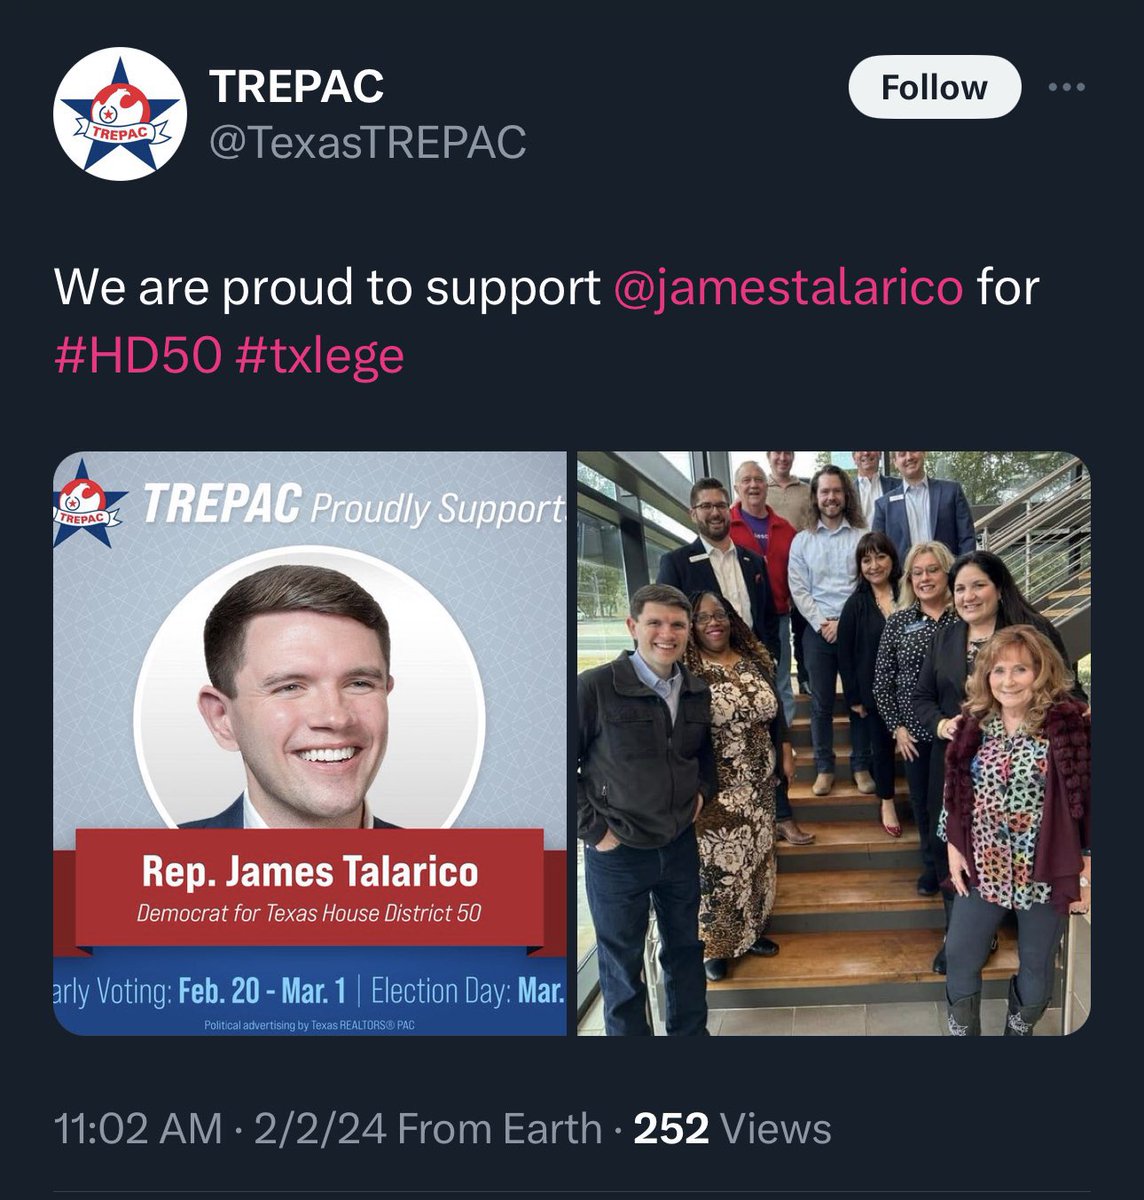 Yuck 🤮

I don’t care that y’all are bipartisan in who y’all endorse but endorsing @jamestalarico the pro-groomer “Christian”?!

Get out of here with your endorsement of this fraud #BasementBrent Hagenbuch 😒

#SD30 #txlege